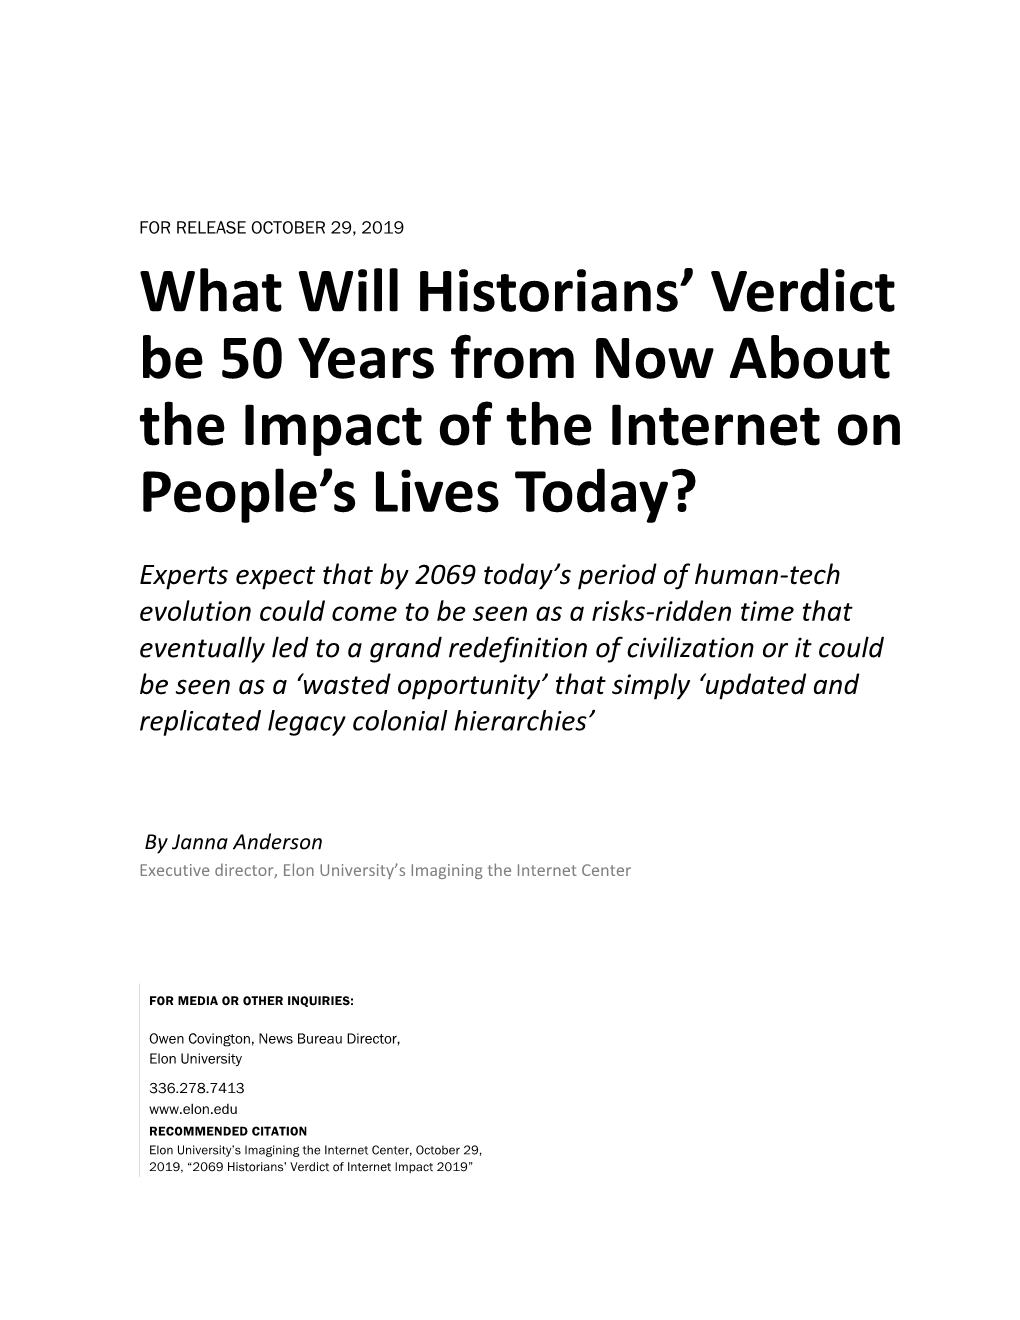 What Will Historians' Verdict Be 50 Years from Now About the Impact Of